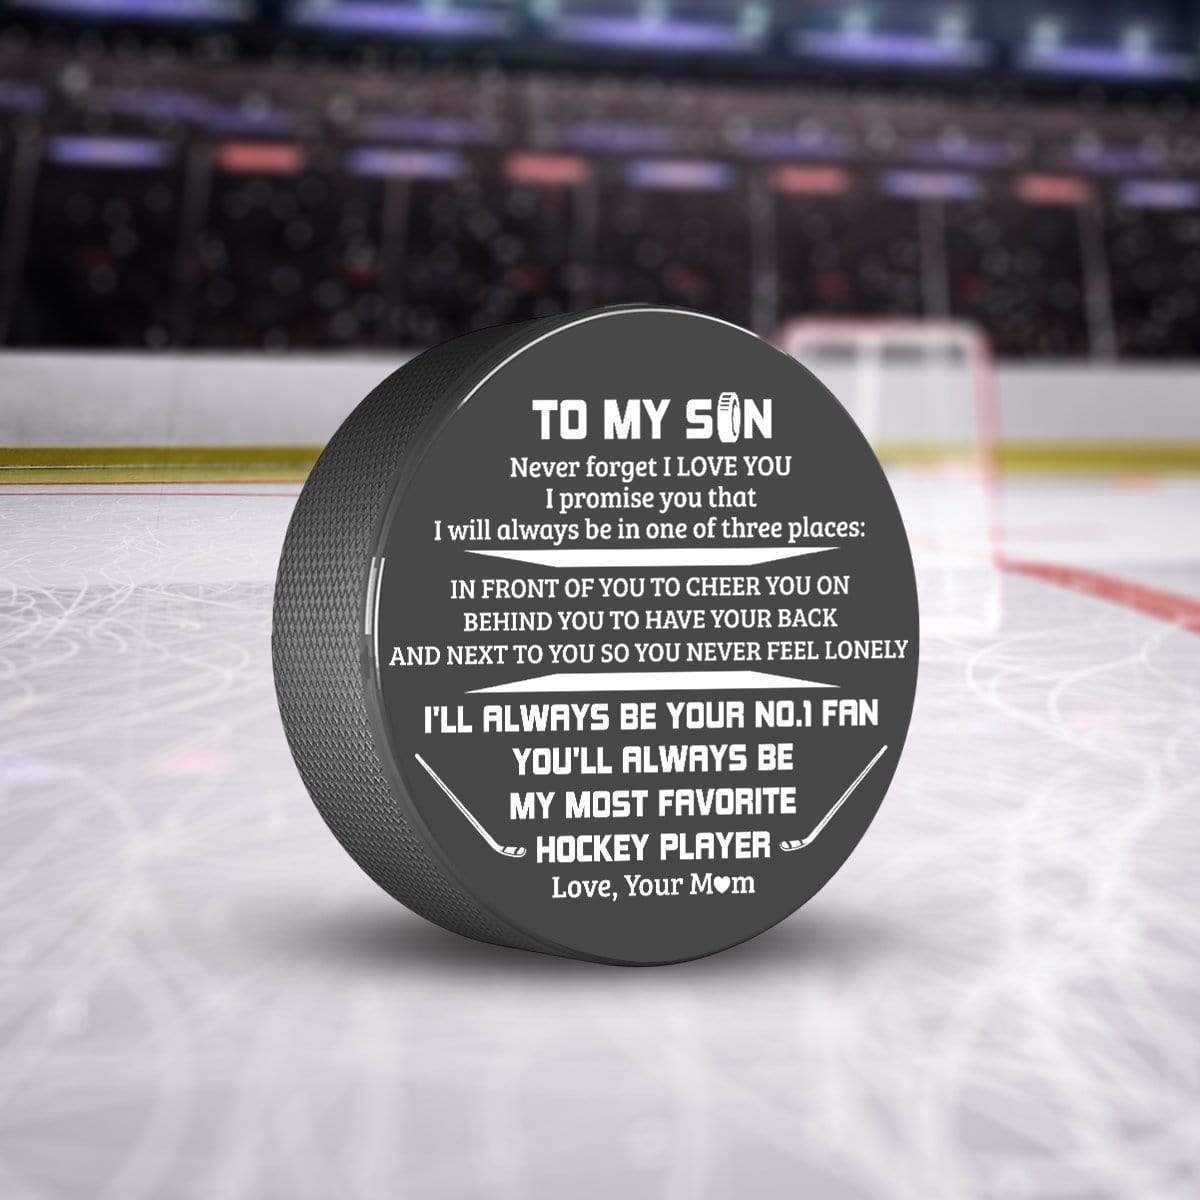 Hockey Puck - Hockey - To My Son - From Mom - Never Forget I love You - Gai16011